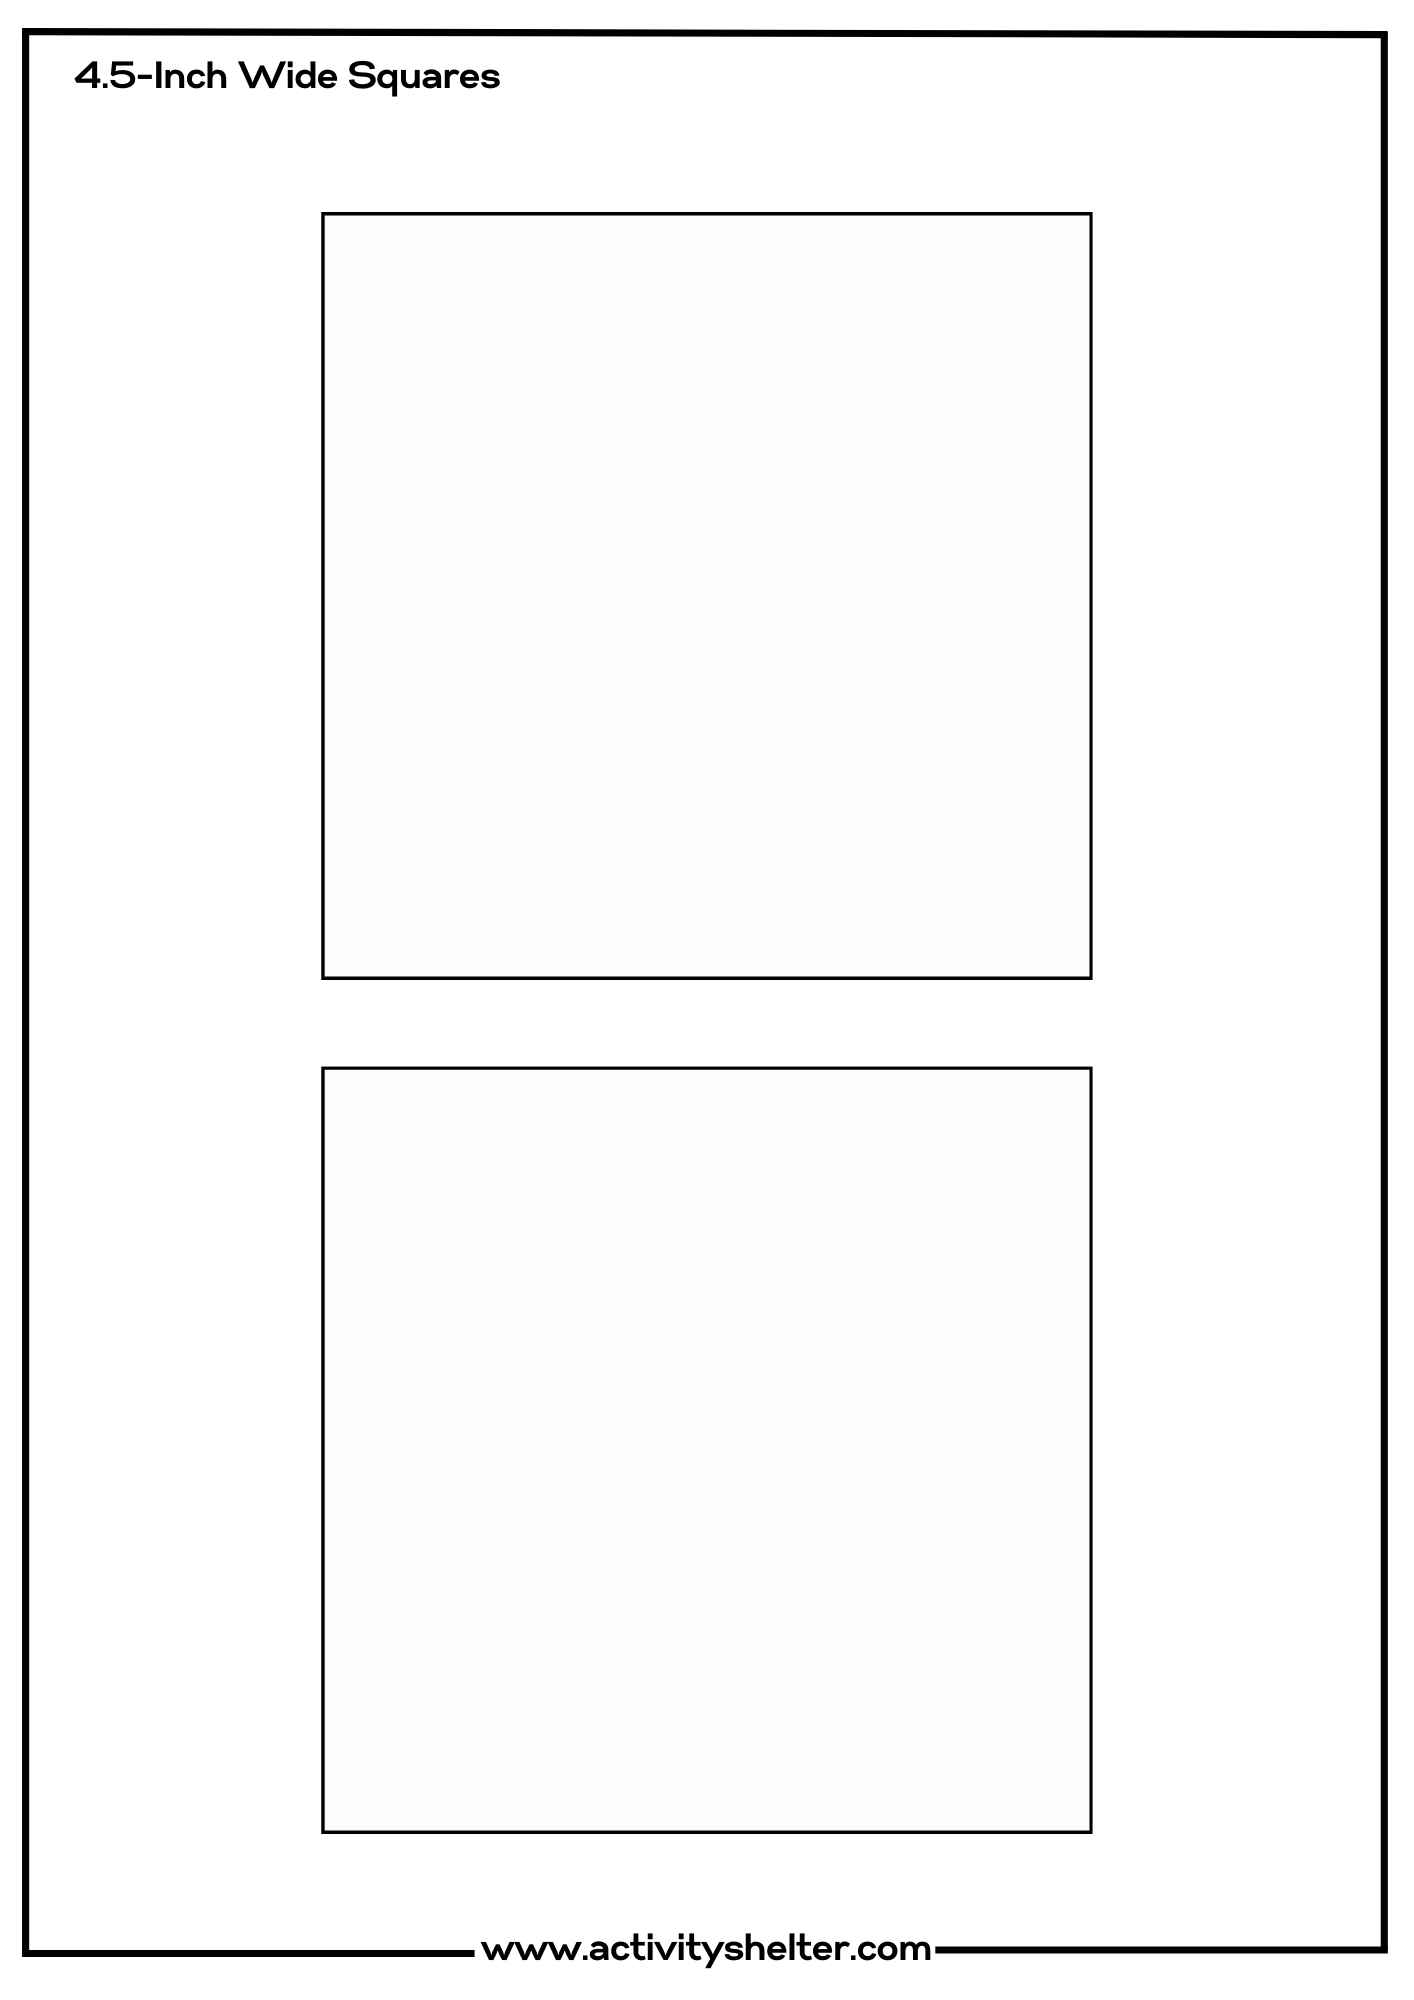 Blank Square Template 4.5-Inch Wide